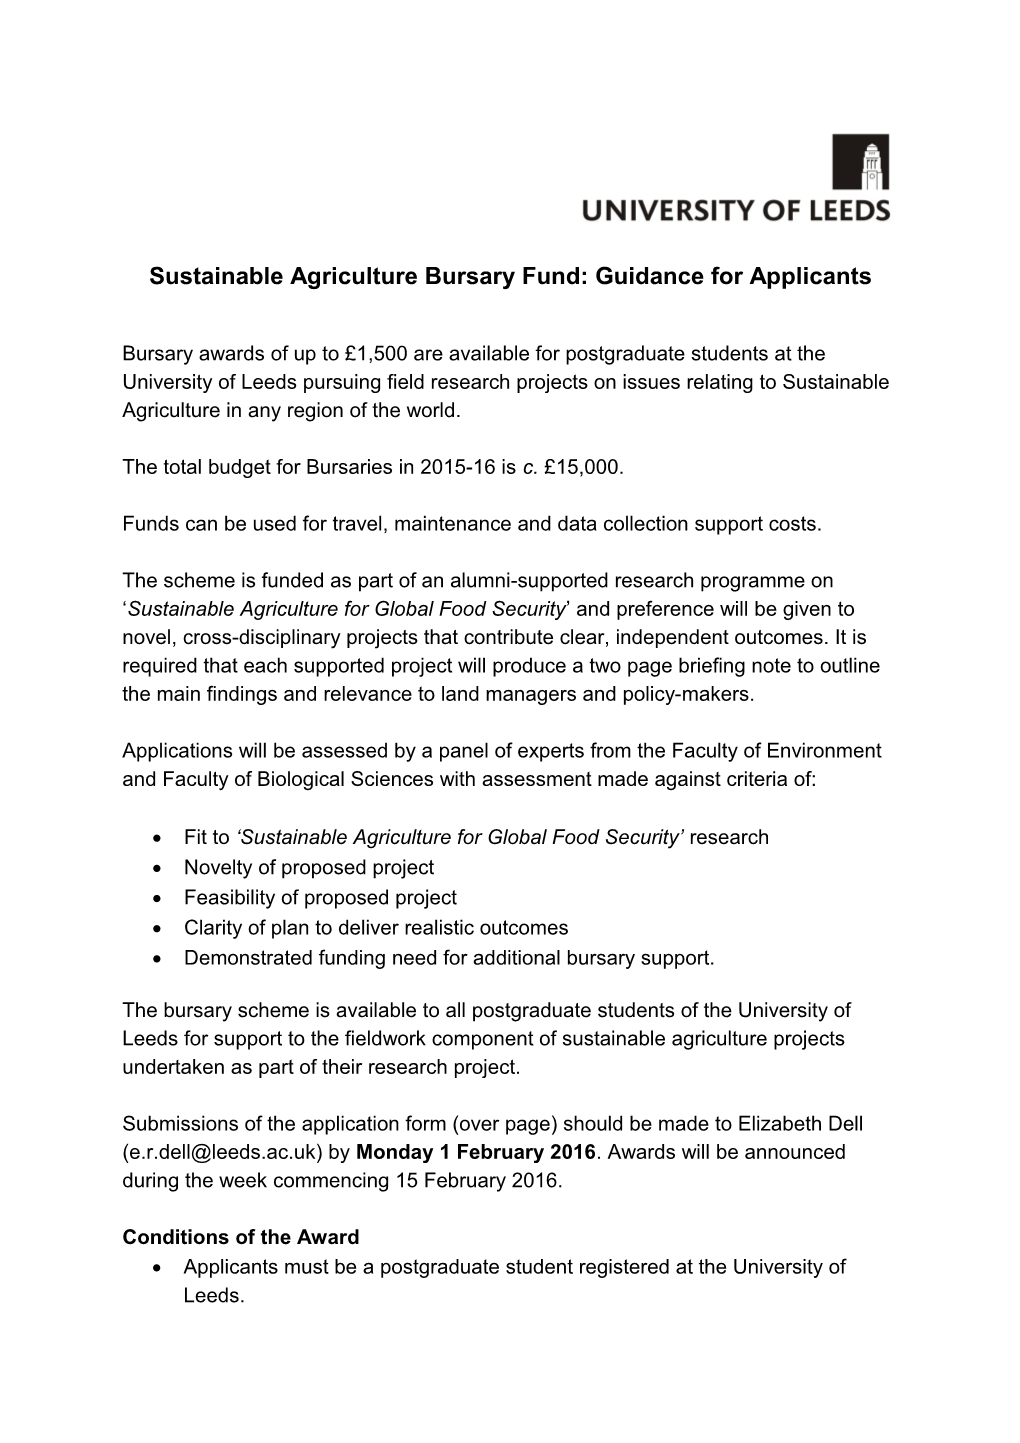 Sustainable Agriculture Bursary Fund: Guidance for Applicants